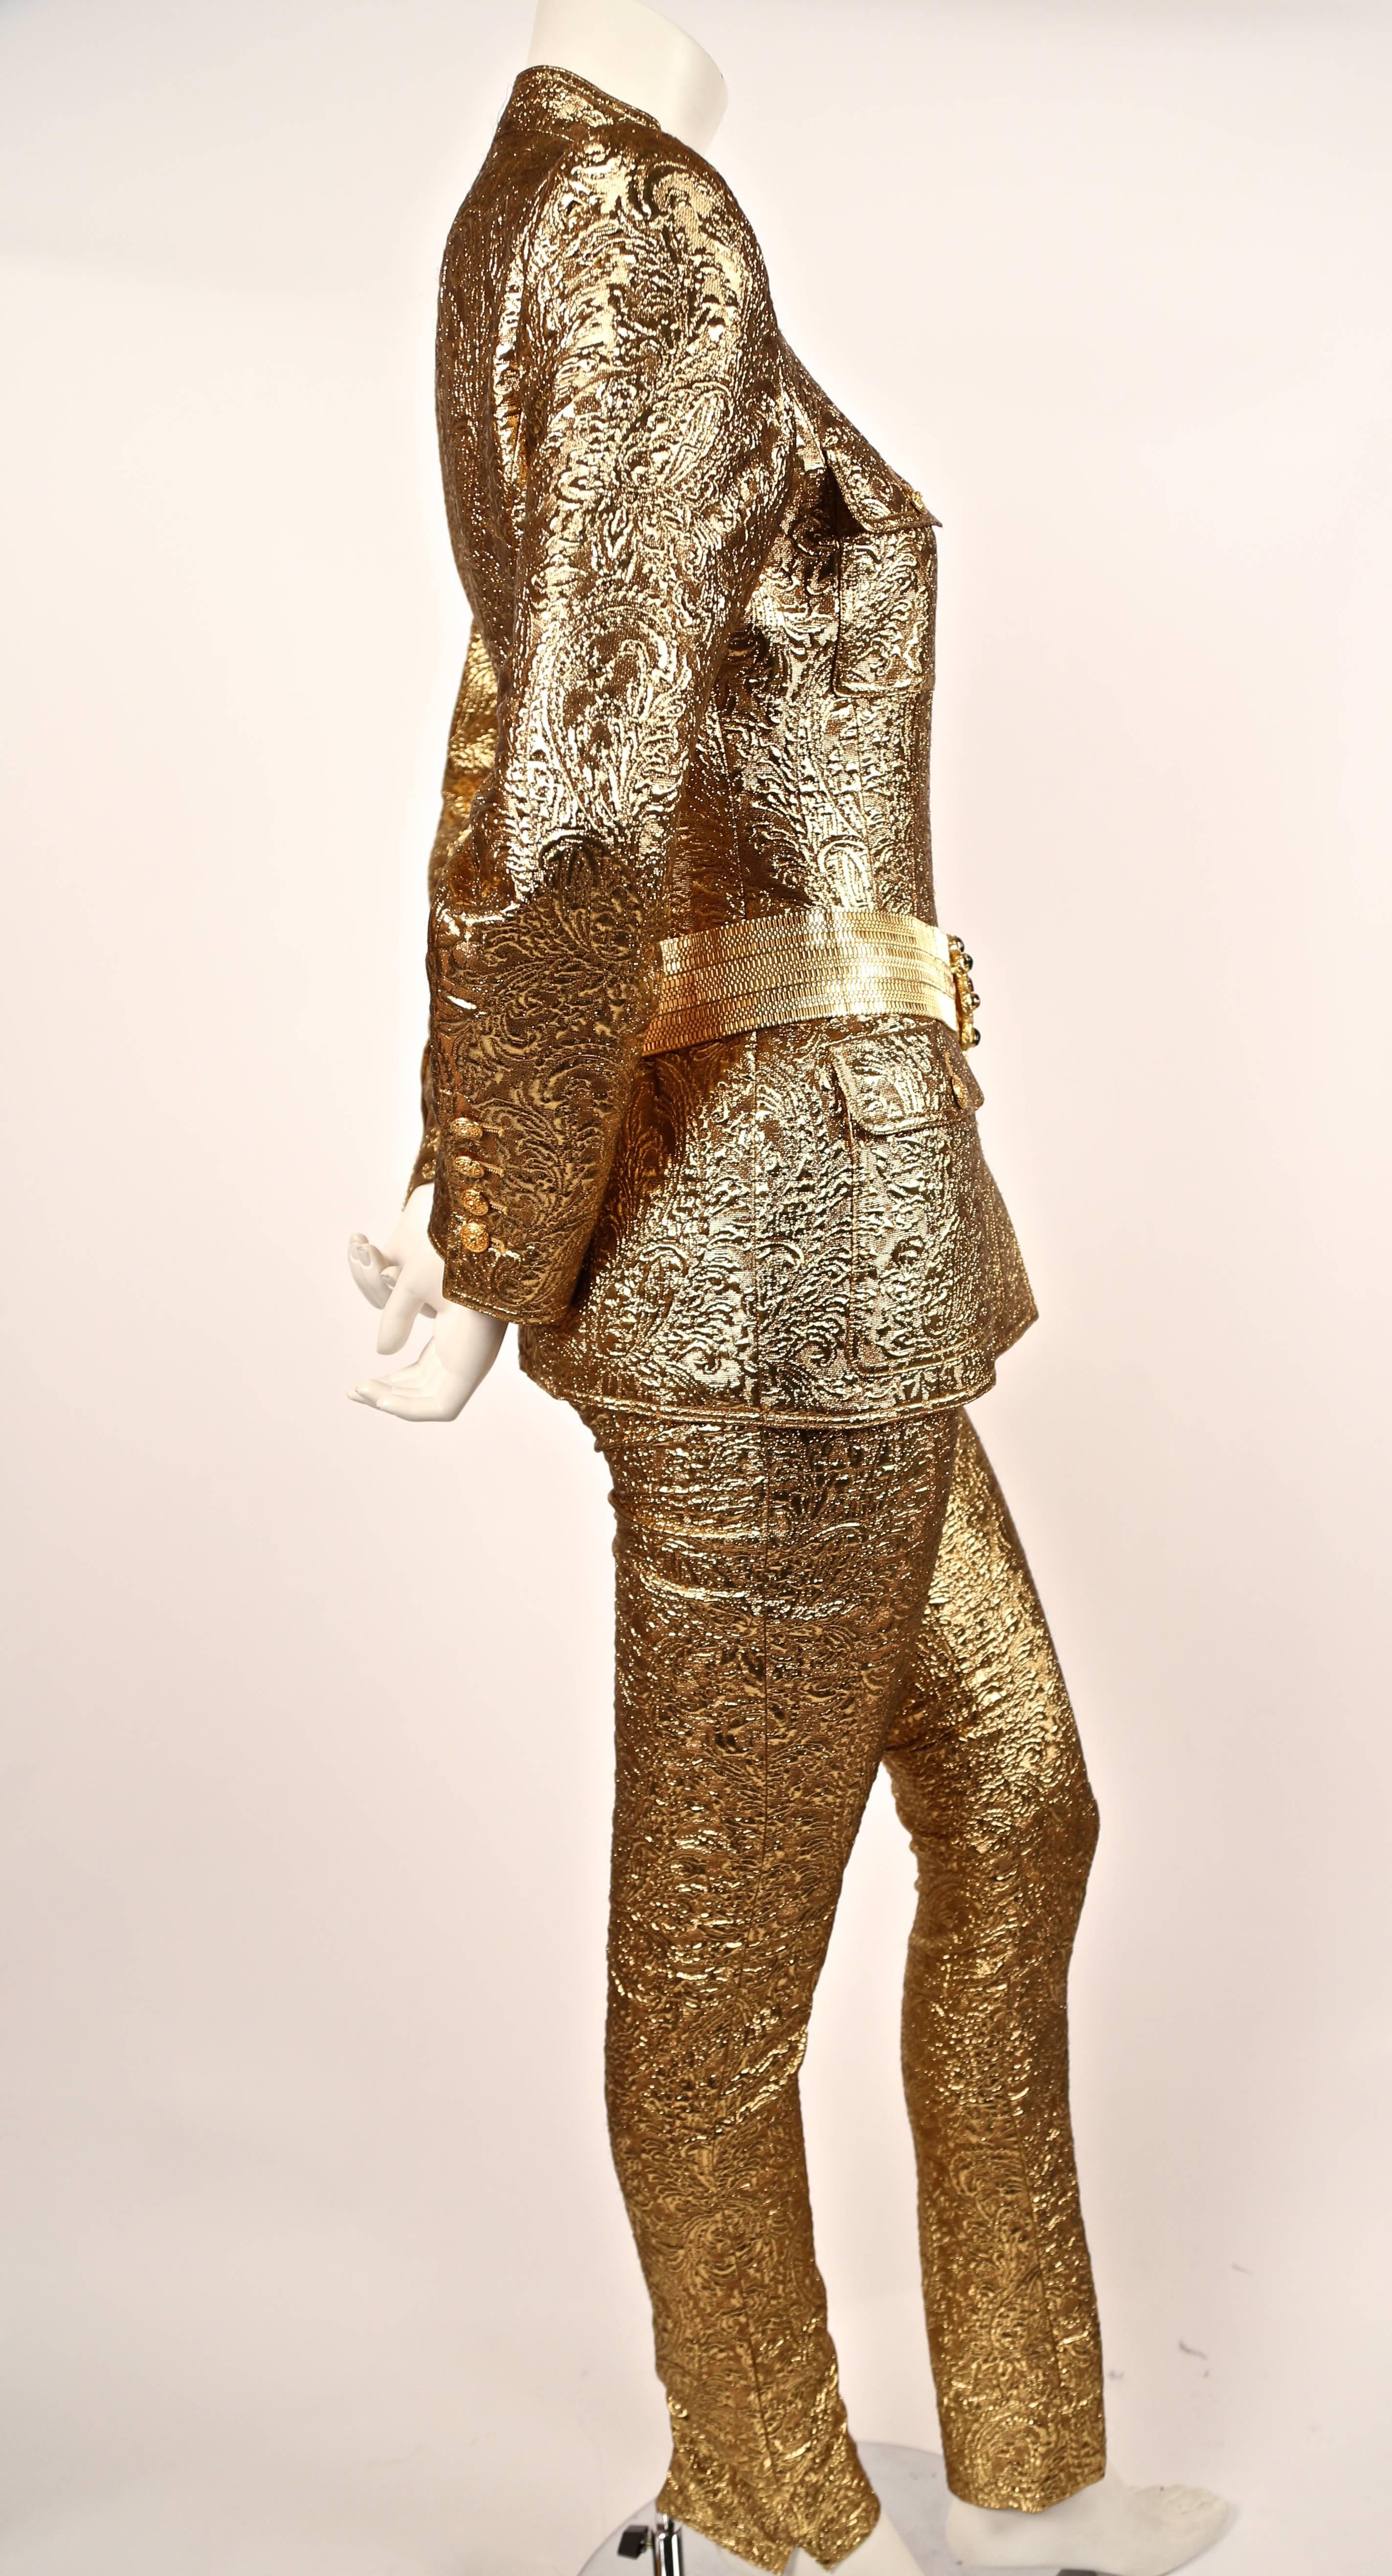 Very rare gold metallic matelasse Lesage quilted suit with belt made of poured Gripoix glass from Chanel as seen on the runway and featured in the Chanel ad campaign for fall of 1996. Approximate measurements for jacket: 14